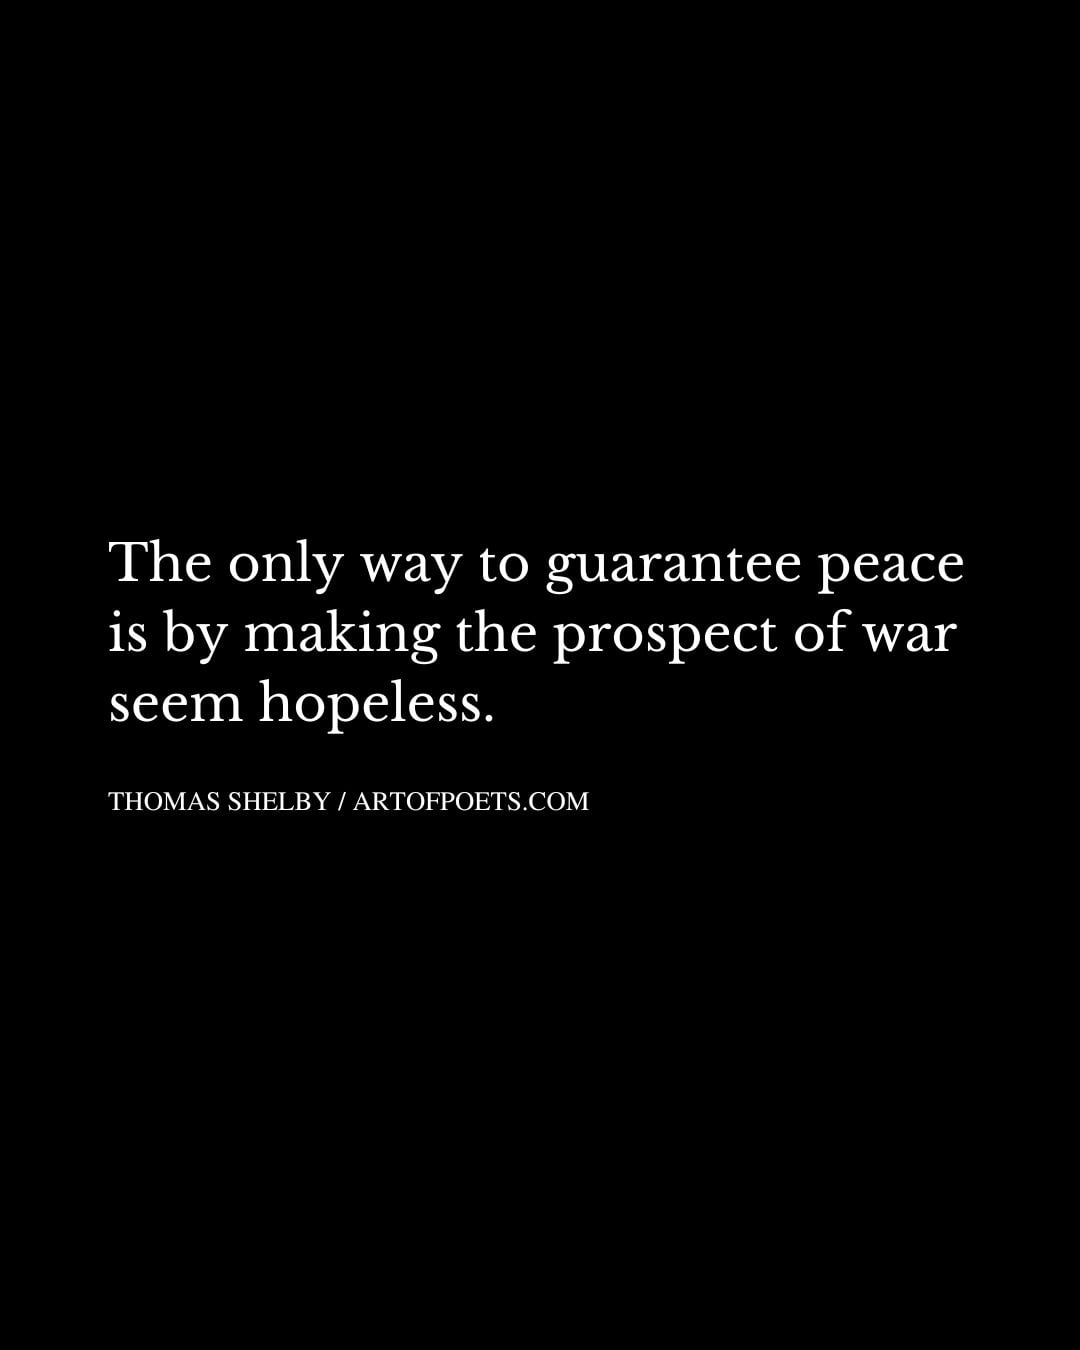 The only way to guarantee peace is by making the prospect of war seem hopeless